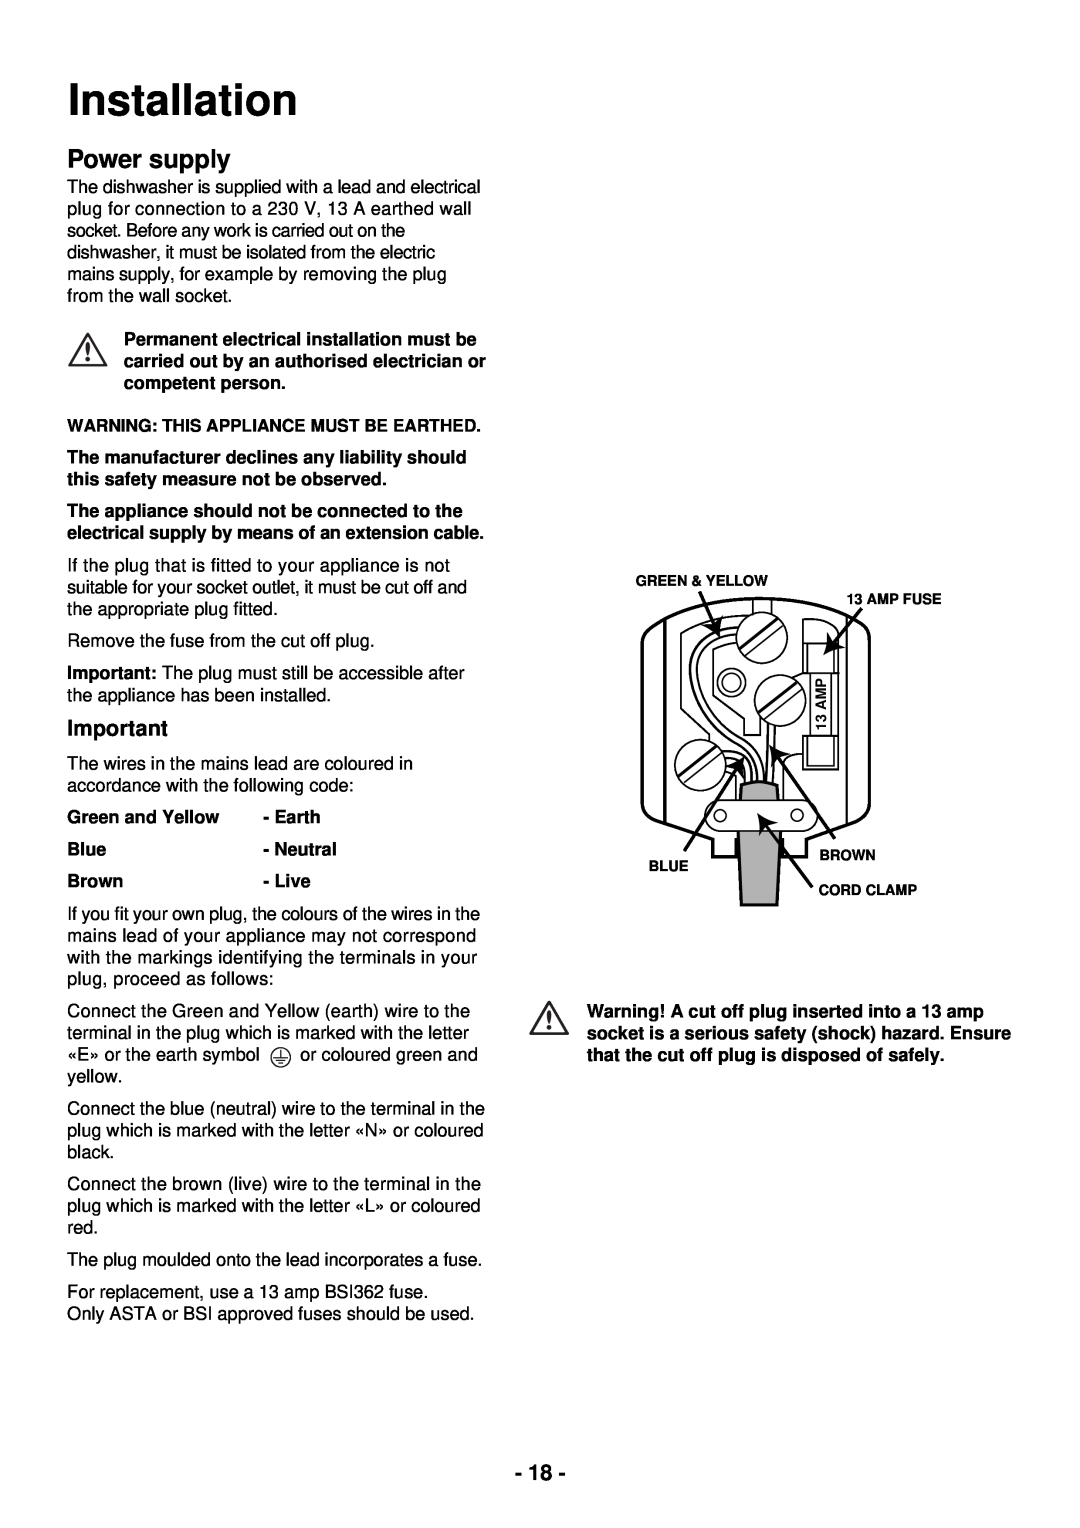 Zanussi ZSF 2440 manual Power supply, Installation, Warning This Appliance Must Be Earthed, Green and Yellow 